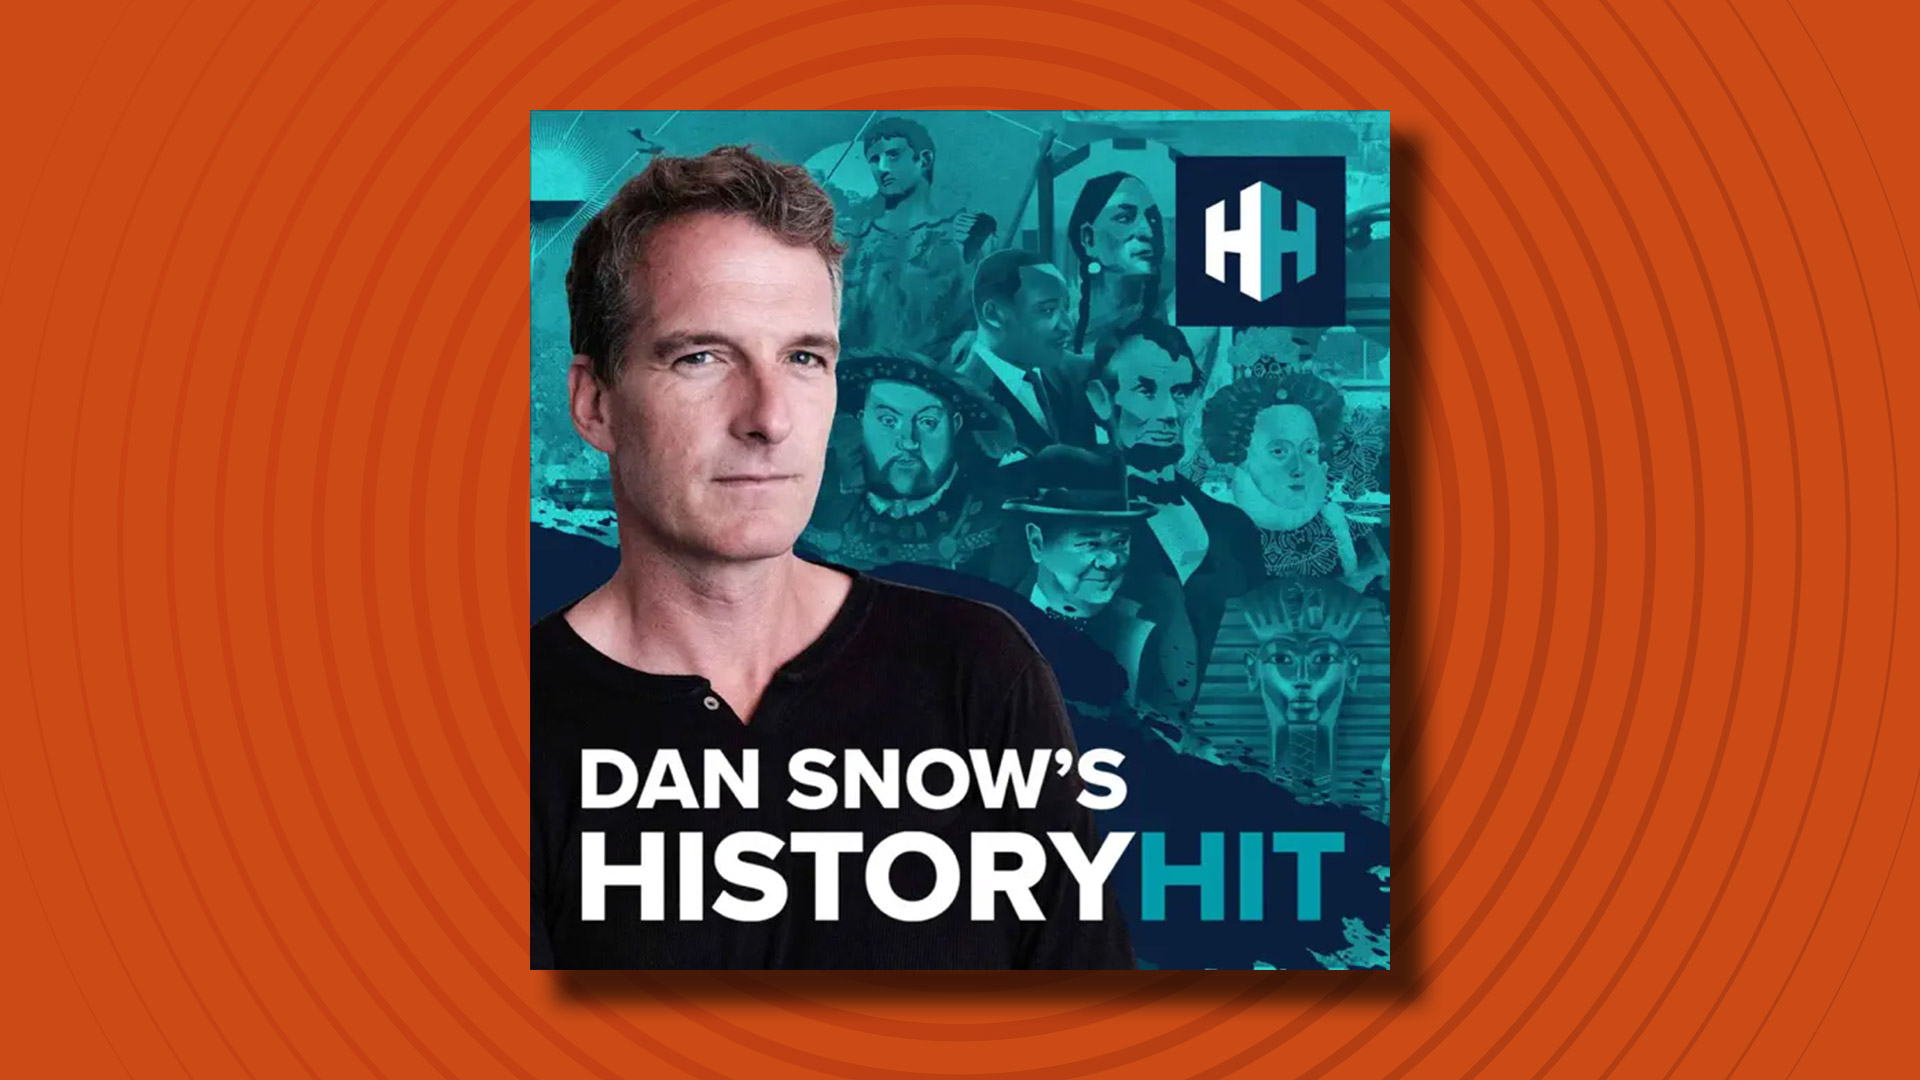 The logo of the Dan Snow's History Hit podcast on an orange background